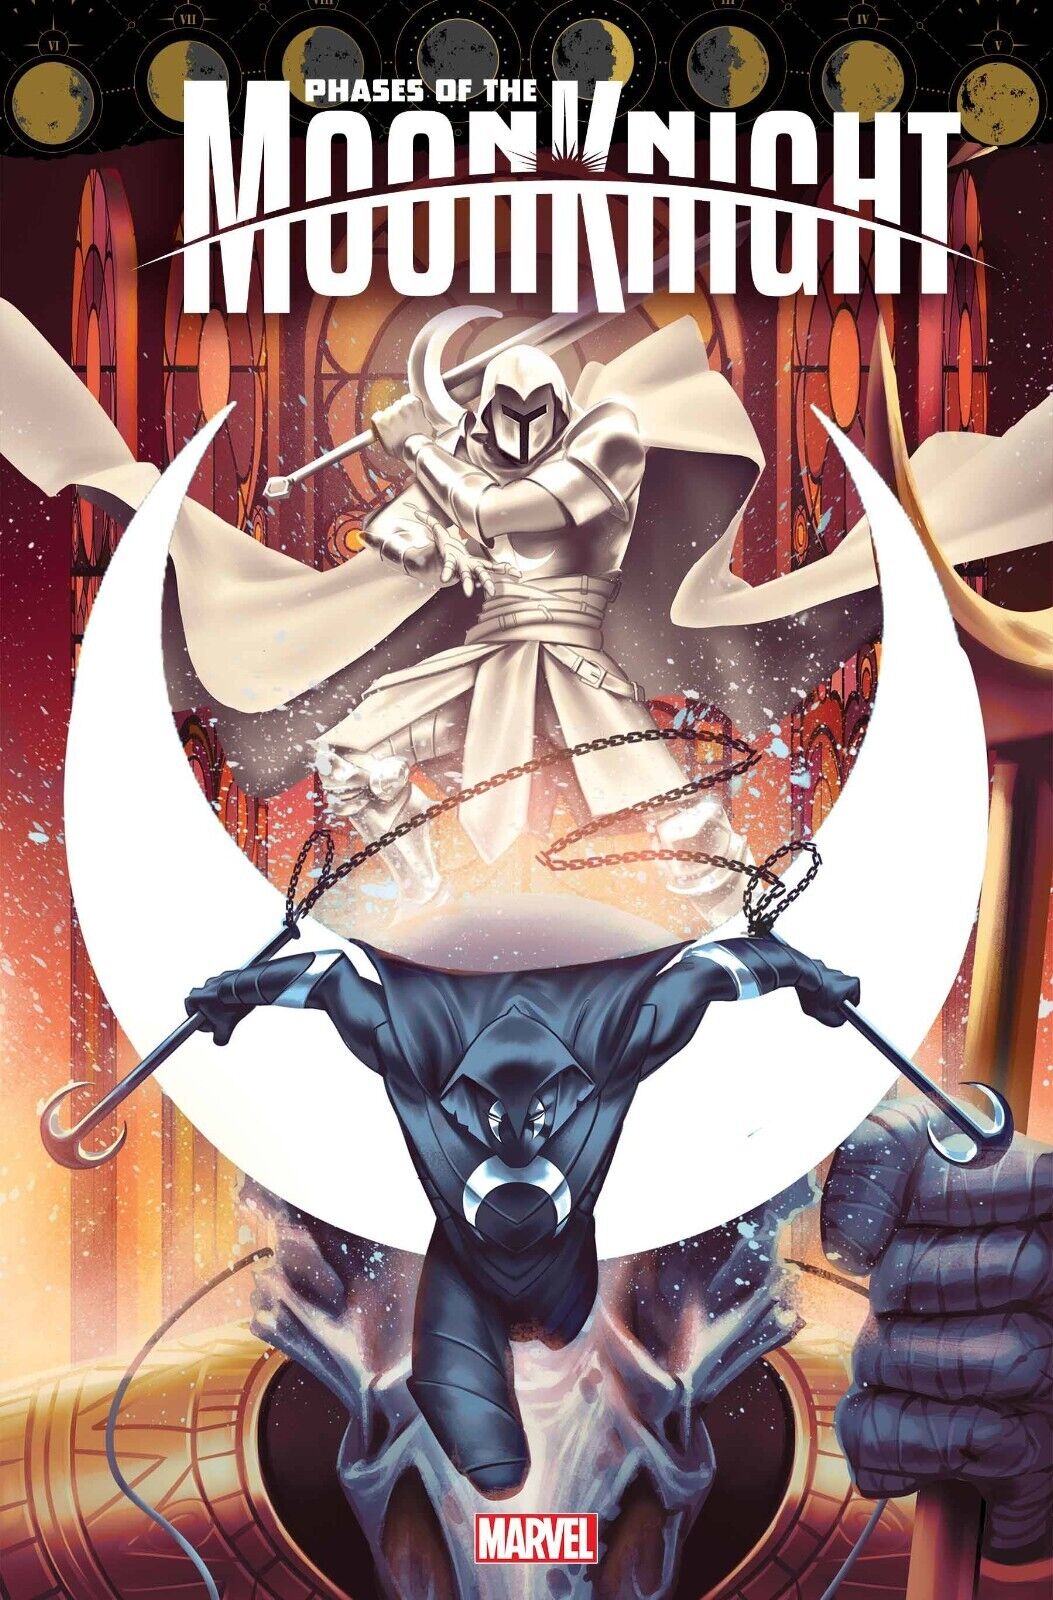 PHASES OF THE MOON KNIGHT #1 (OF 4)  MARVEL  PRESALE AUGUST  28TH